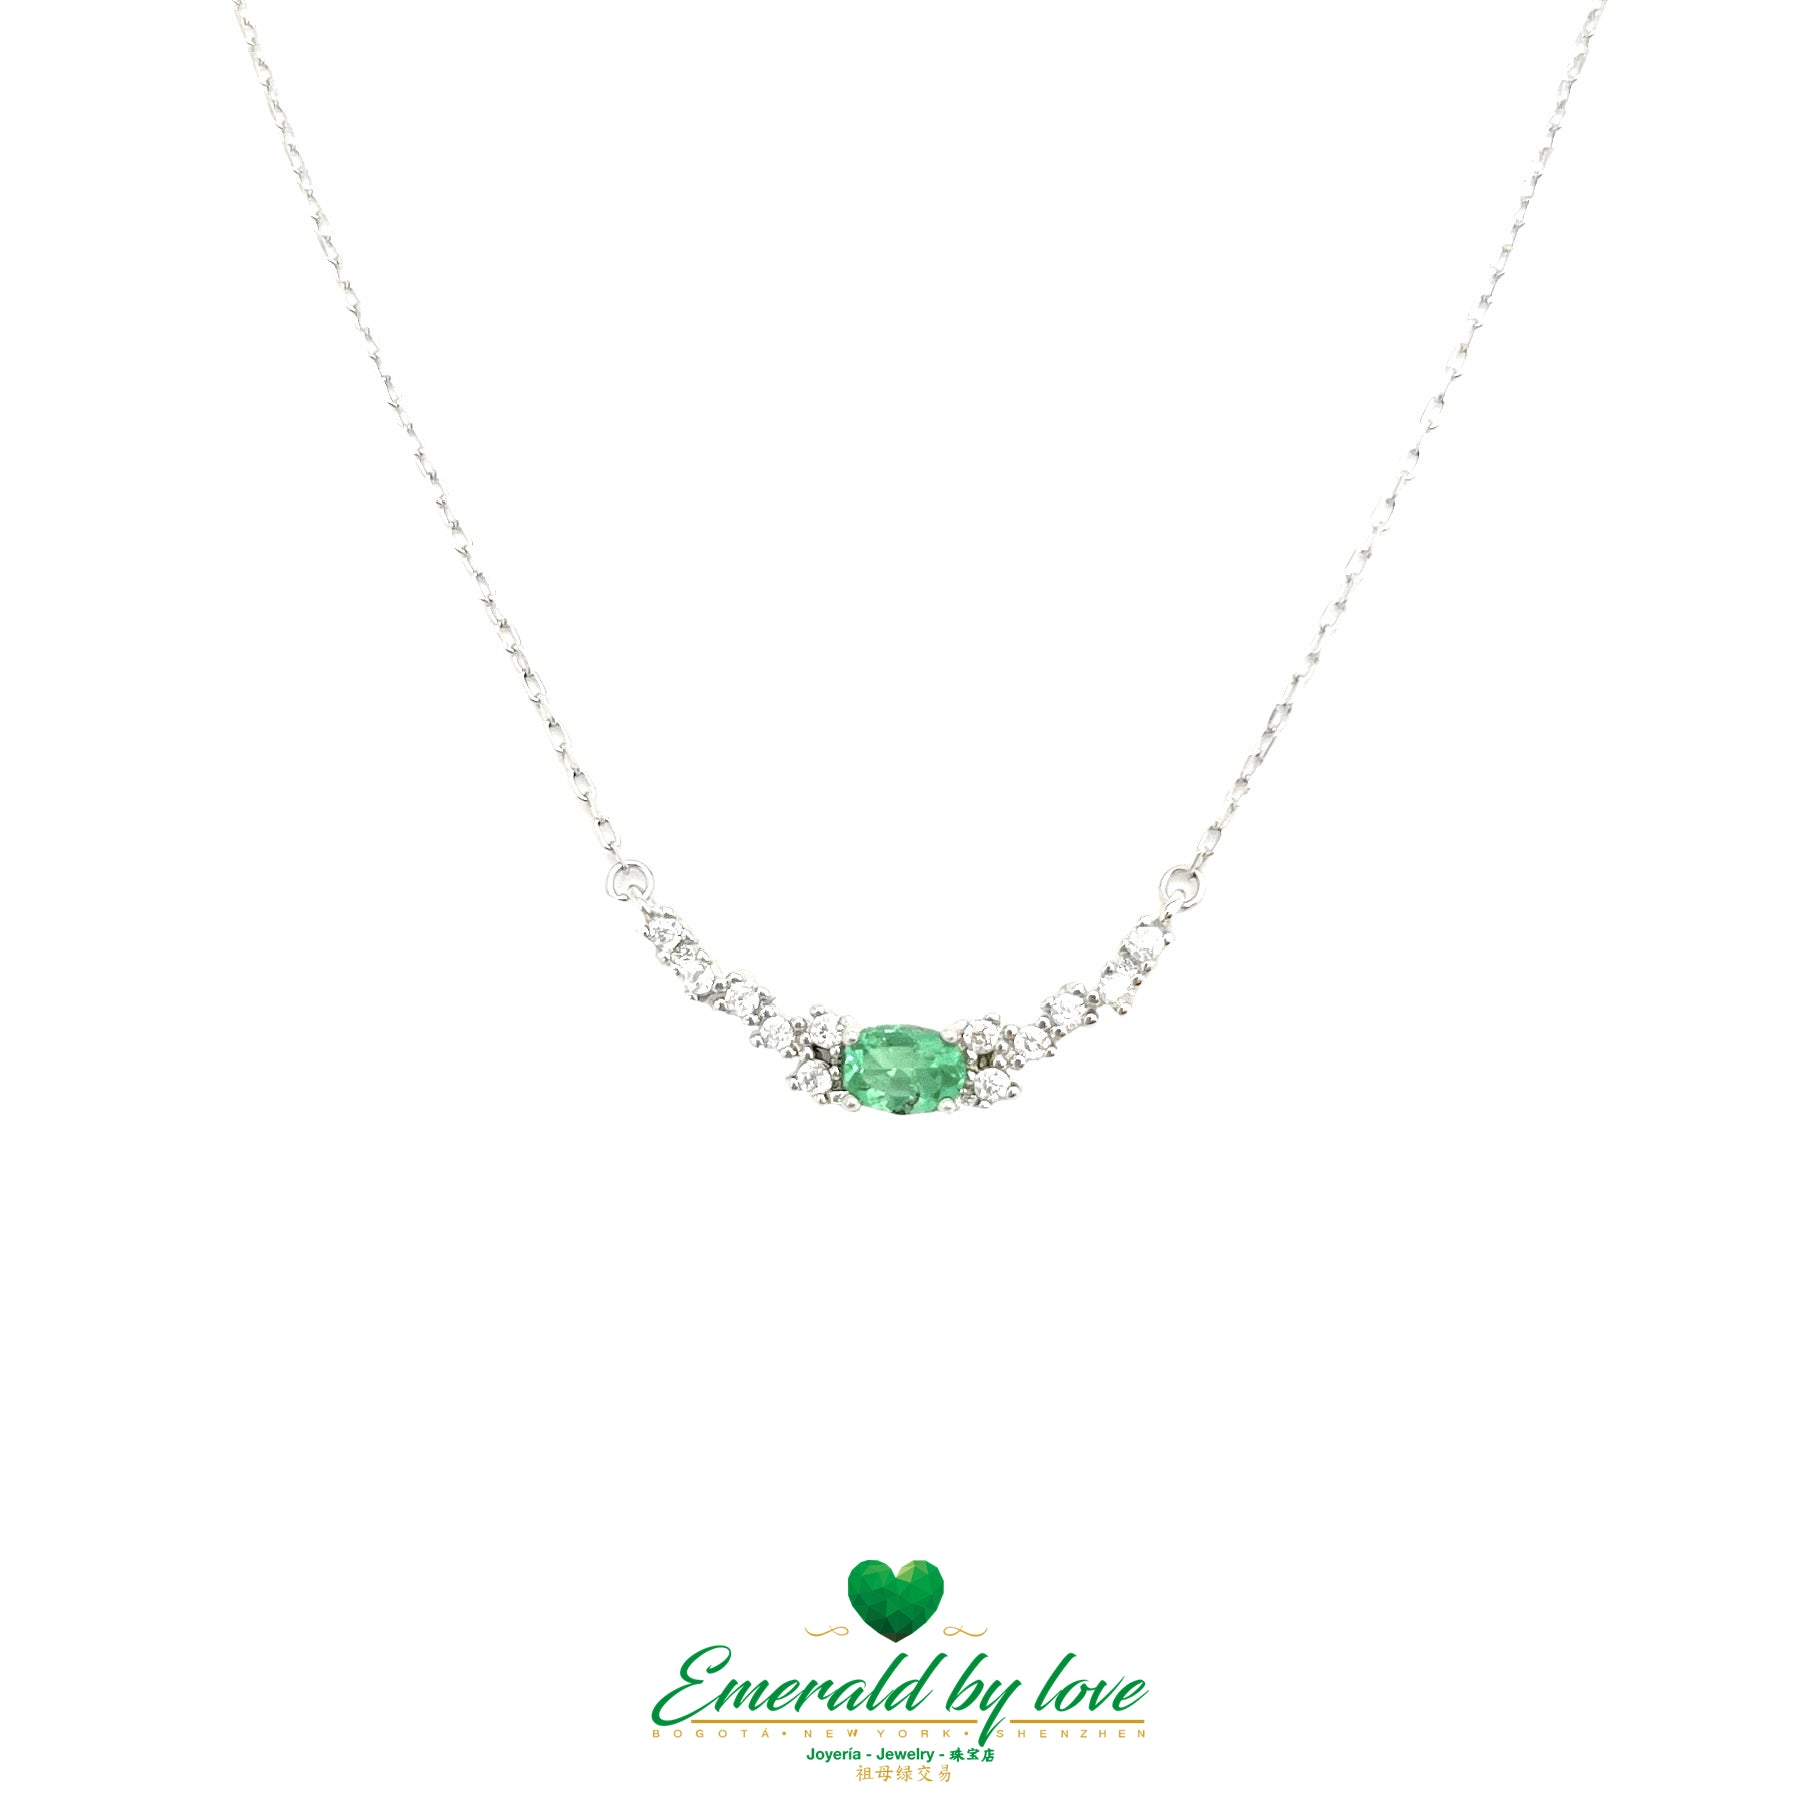 Sterling Silver Choker with Oval Crystal Emerald Surrounded by Baguette-Cut Cubic Zirconia